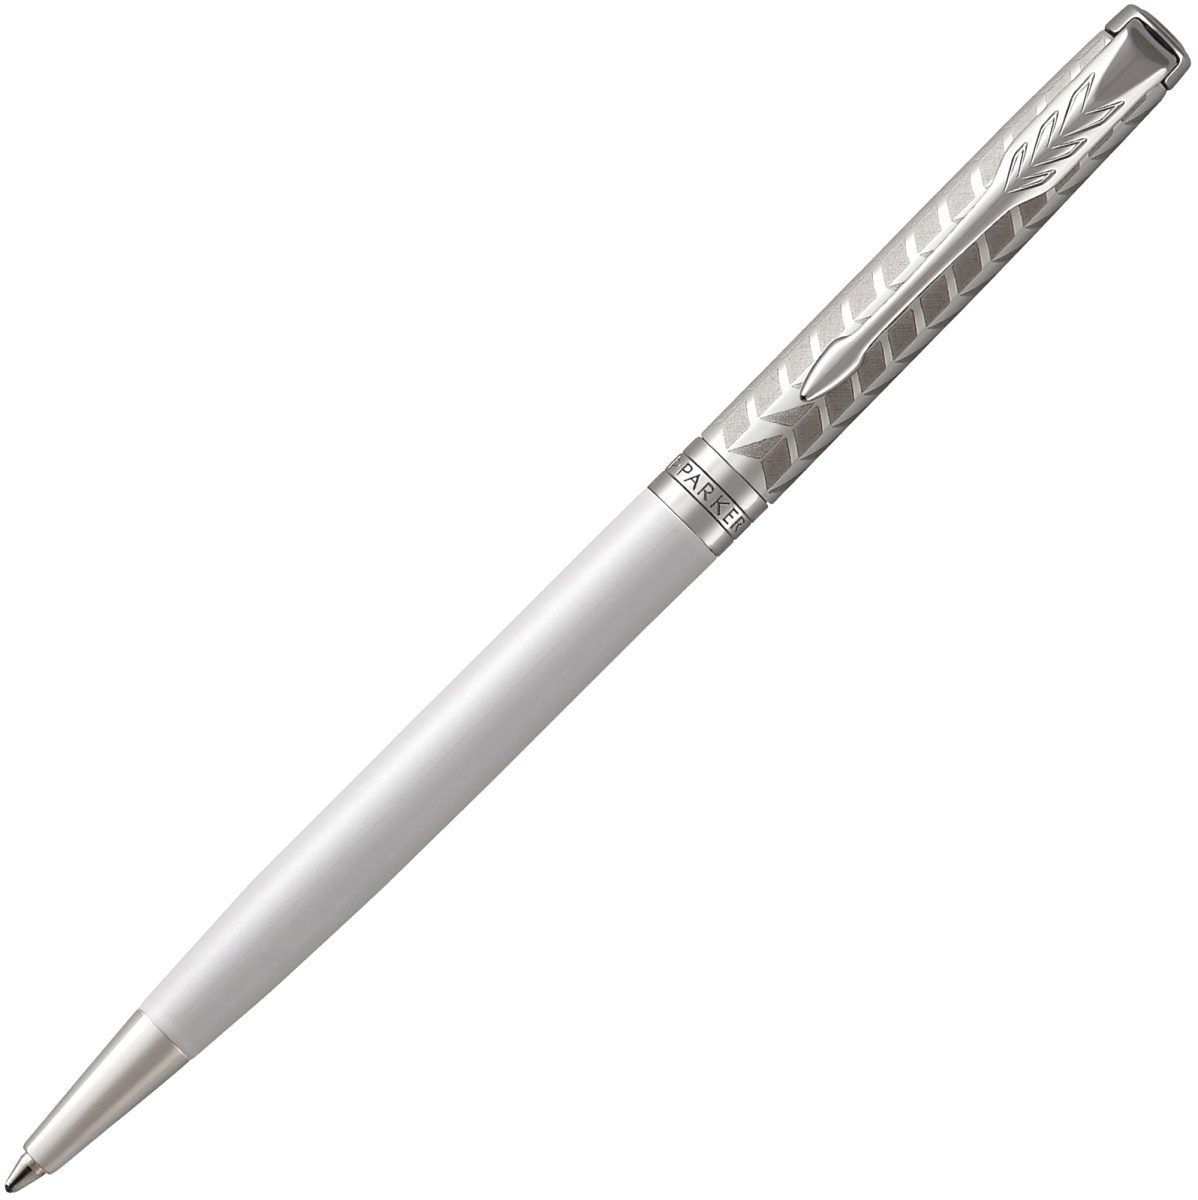  Шариковая ручка Parker Sonnet Slim Core K440, Metal and Pearl Lacquer CT